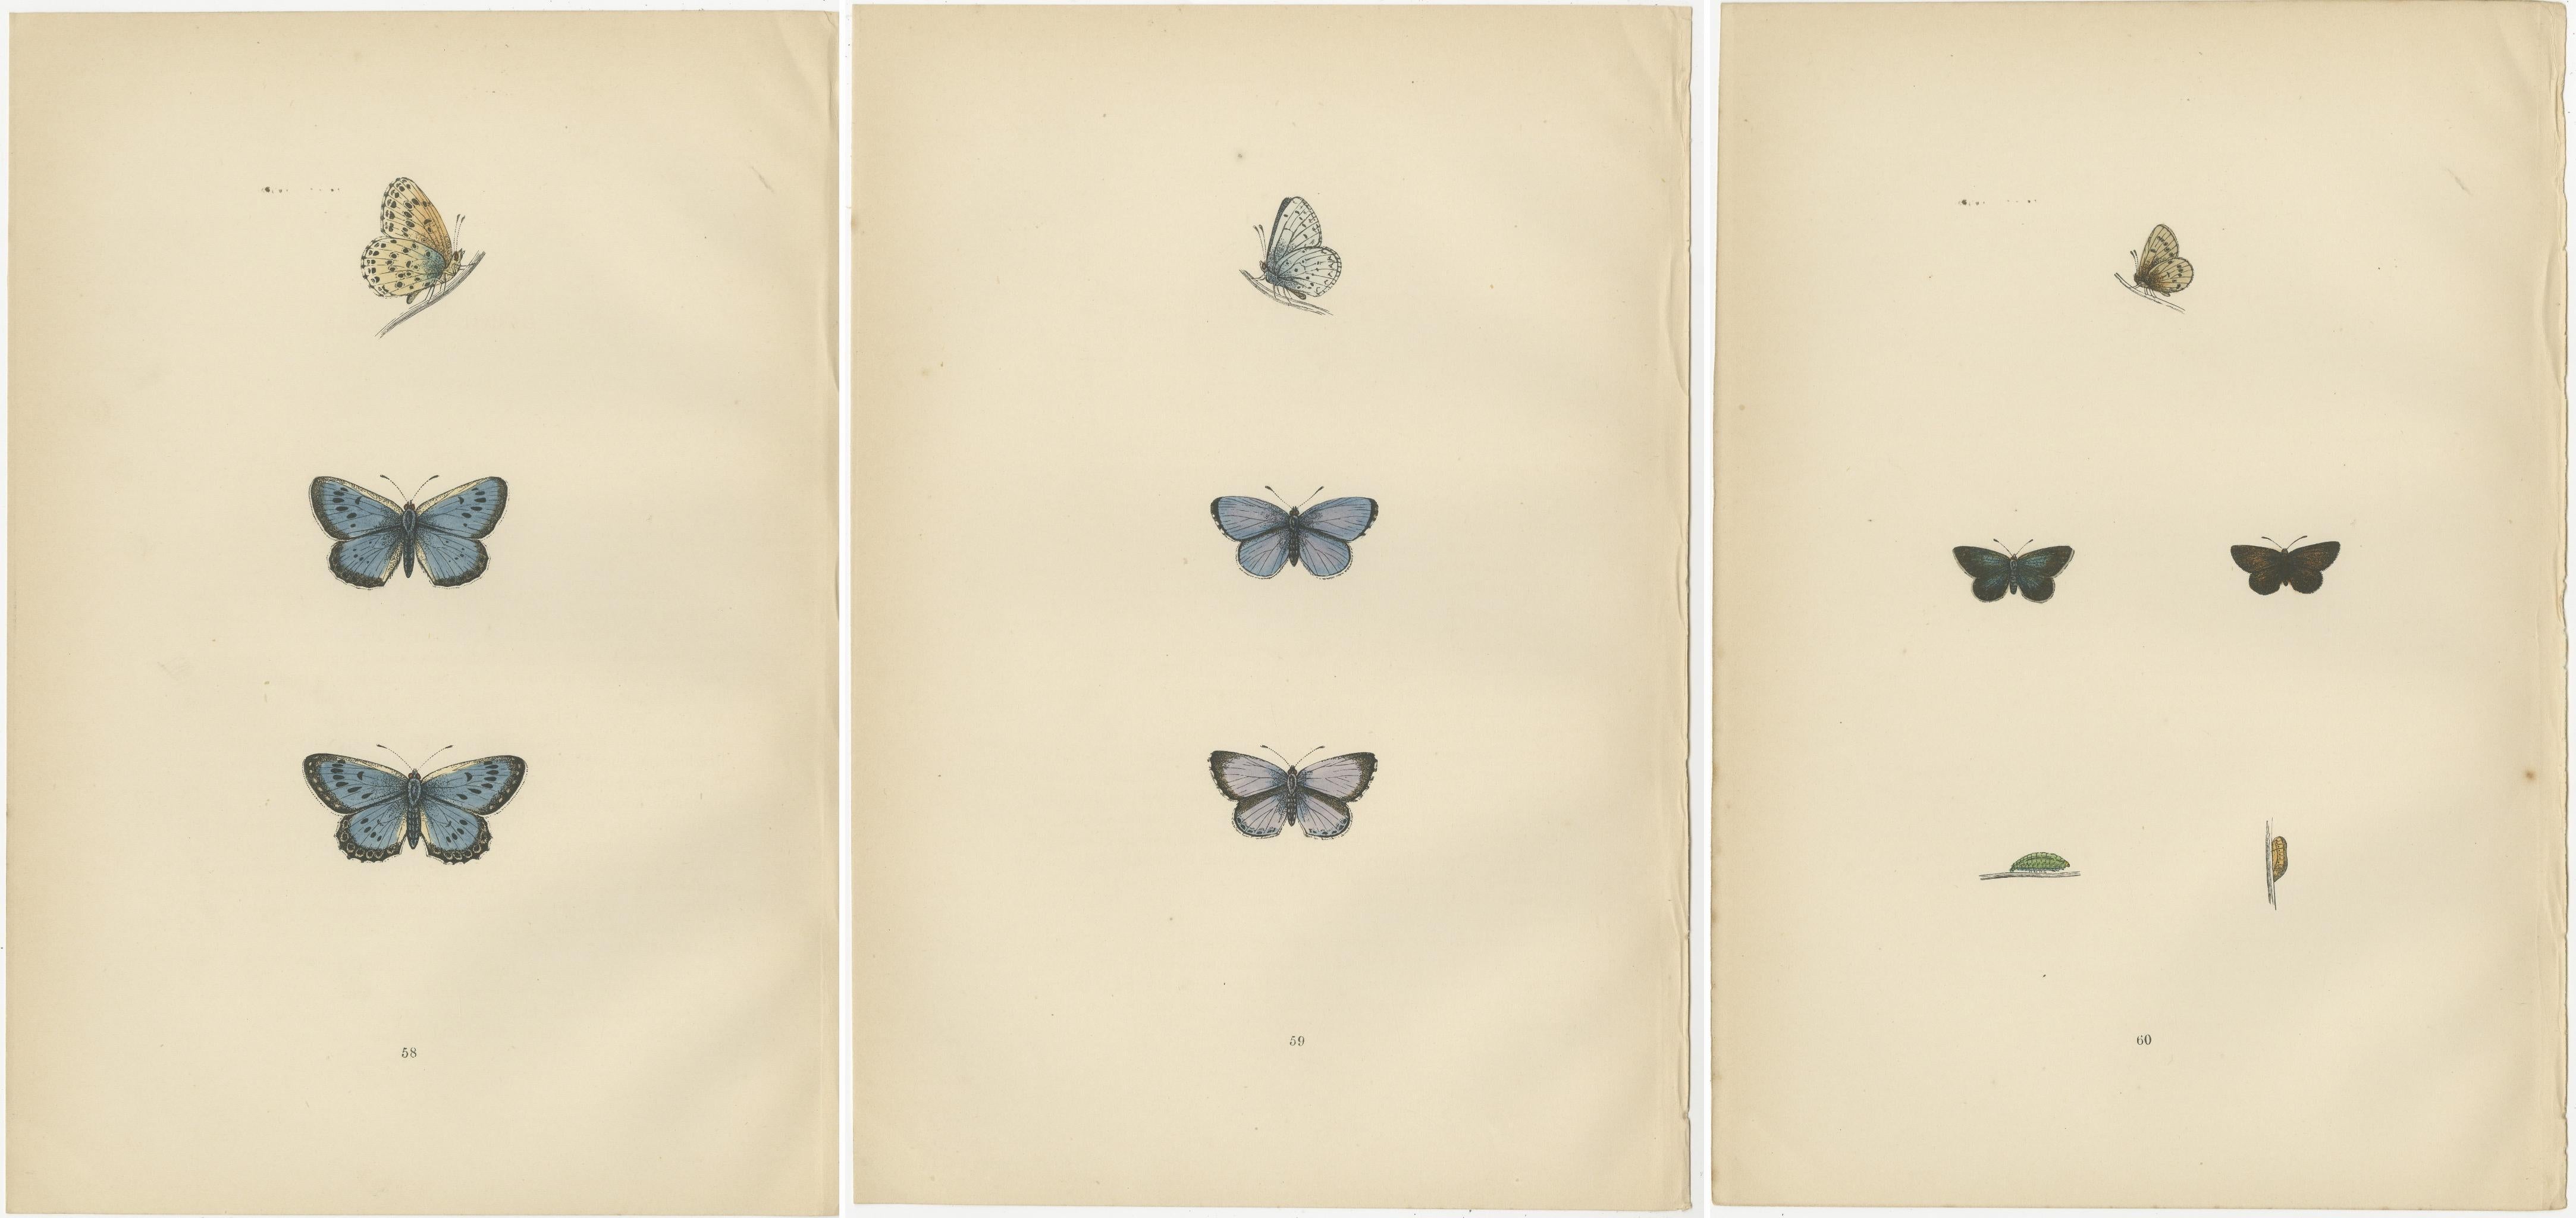 Paper Winged Jewels of the Victorian Era: Hand-Colored Butterfly Masterpieces, 1890 For Sale